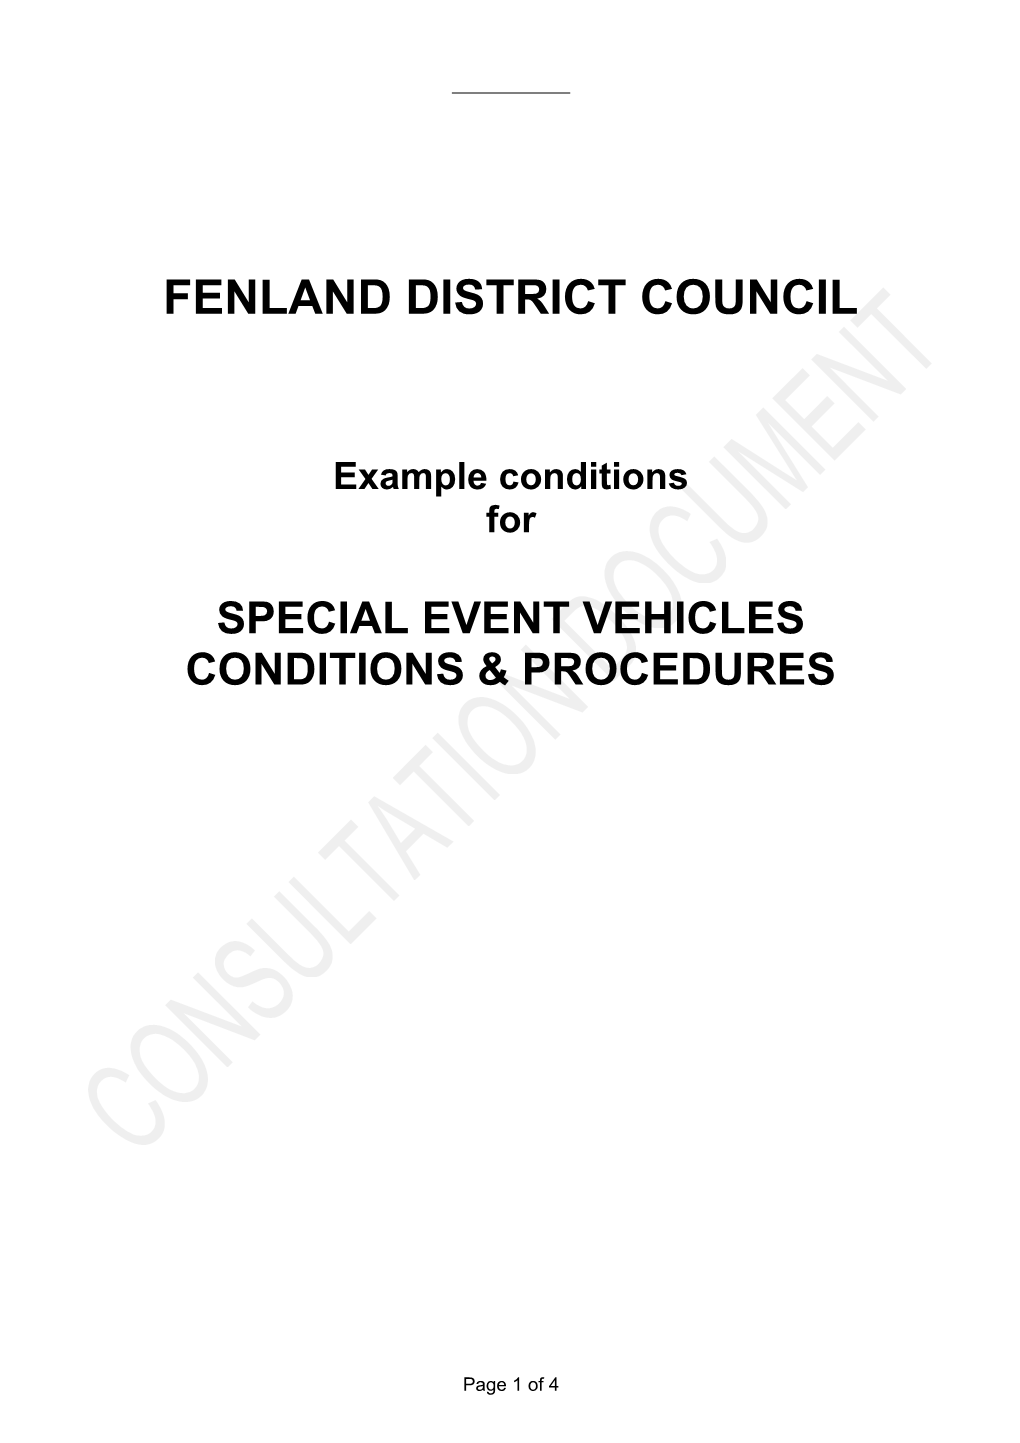 Conditions Attached to Private Hire/Hackney Carriage Driver Conditions